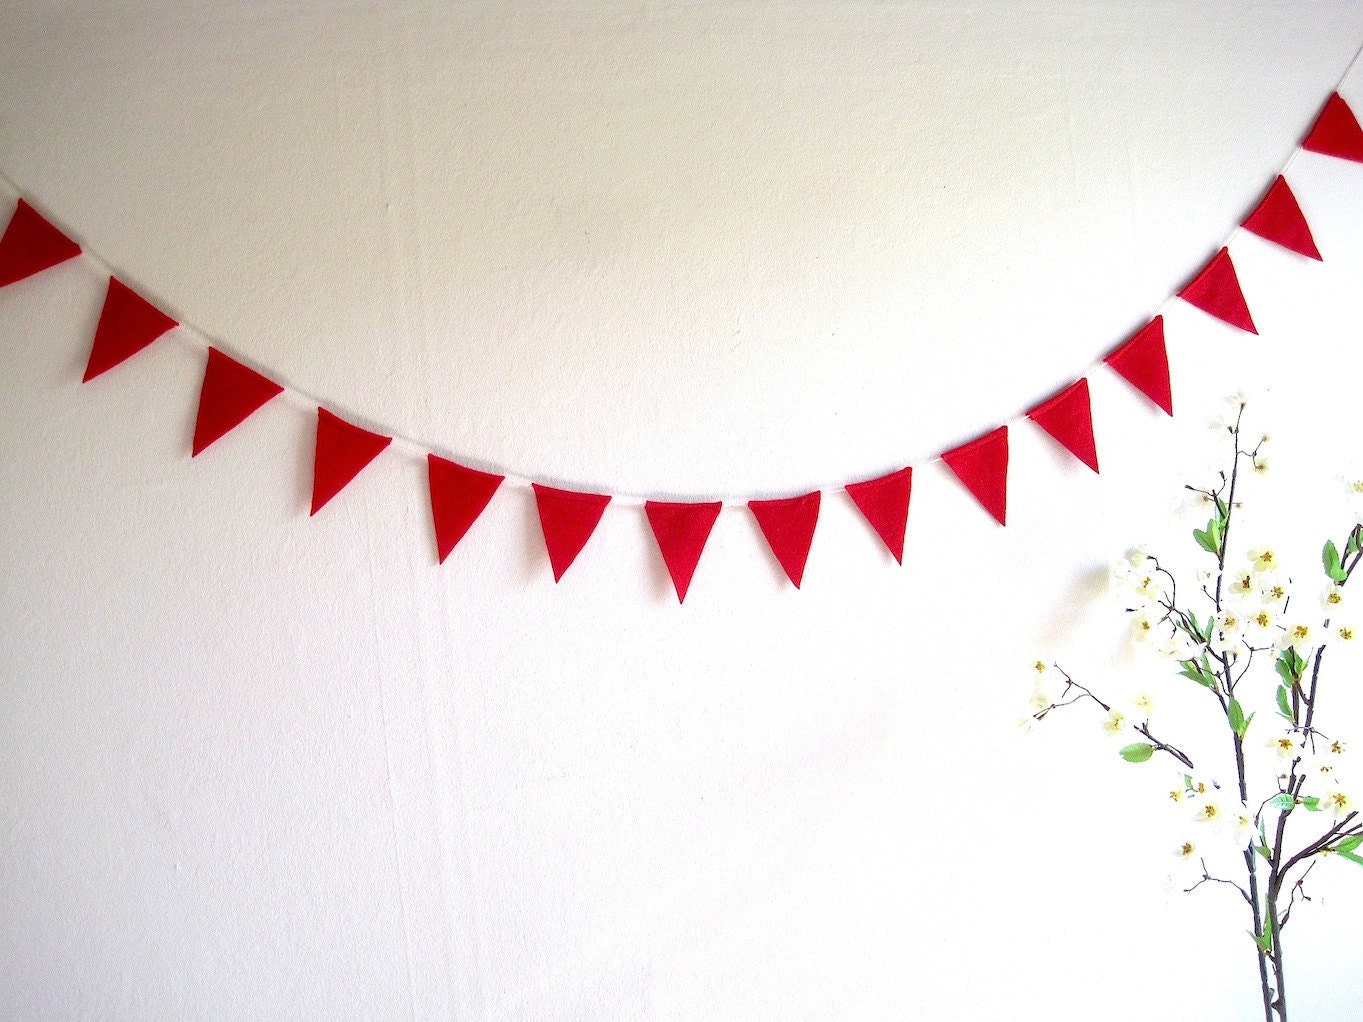 Red Bunting Banner, Valentines day red felt pennant flags, red wedding bunting decoration, xmas felt garland, reusable, handmade - AntnFrog